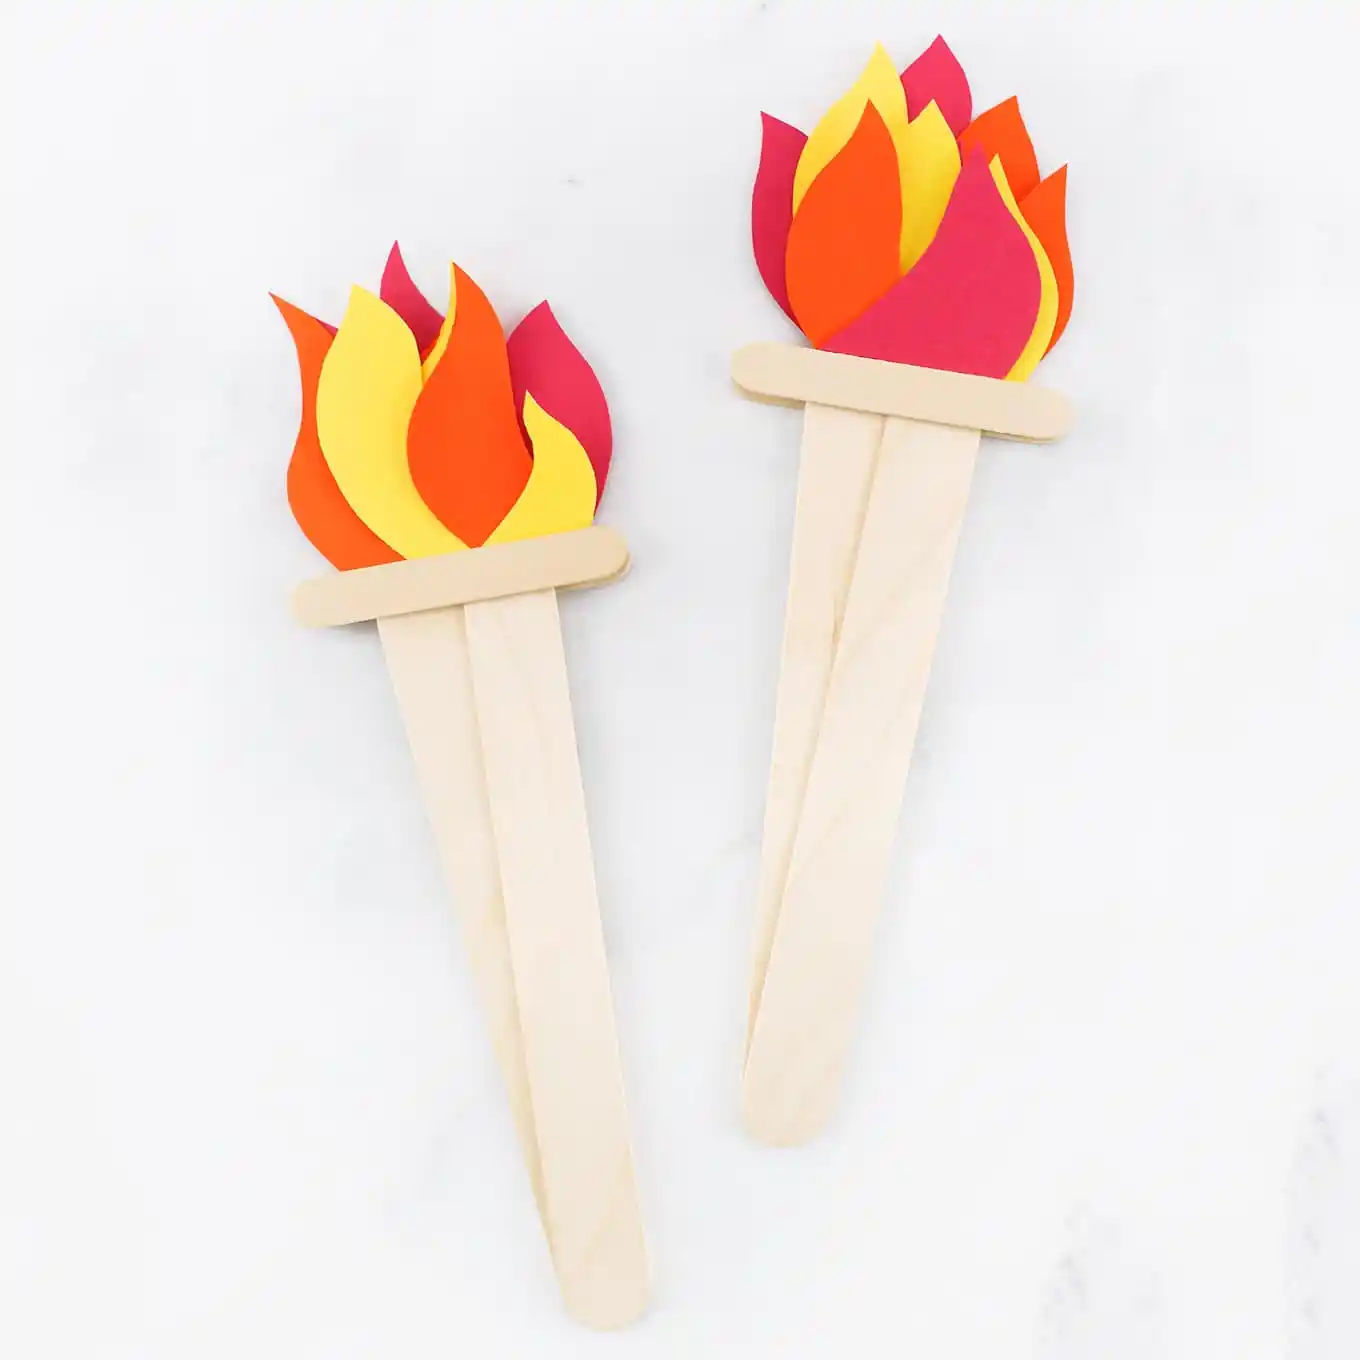 Olympics-Inspired Torch Craft